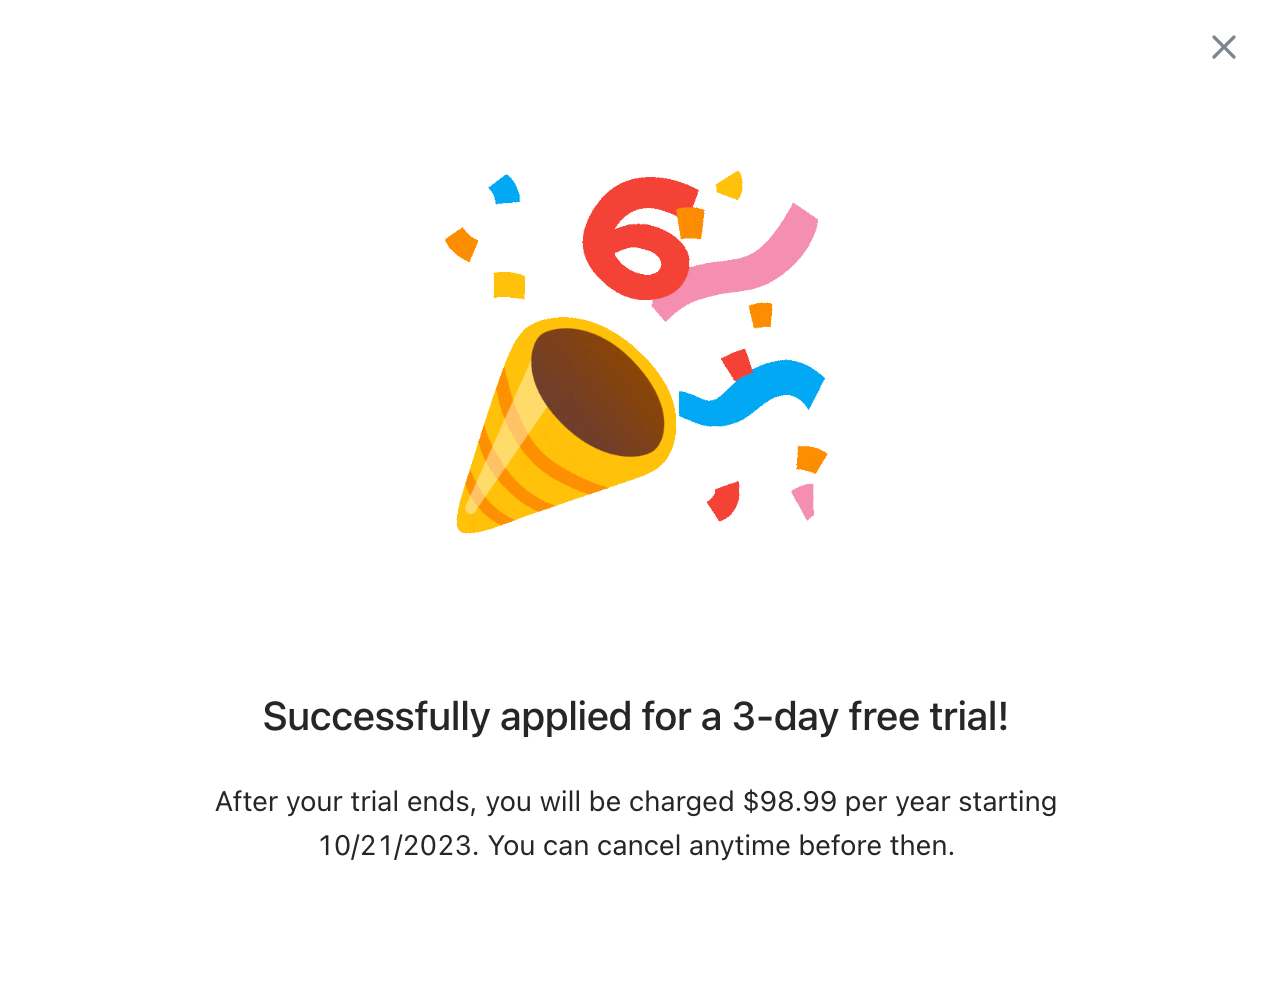 3-day-free-trial-web-04.png